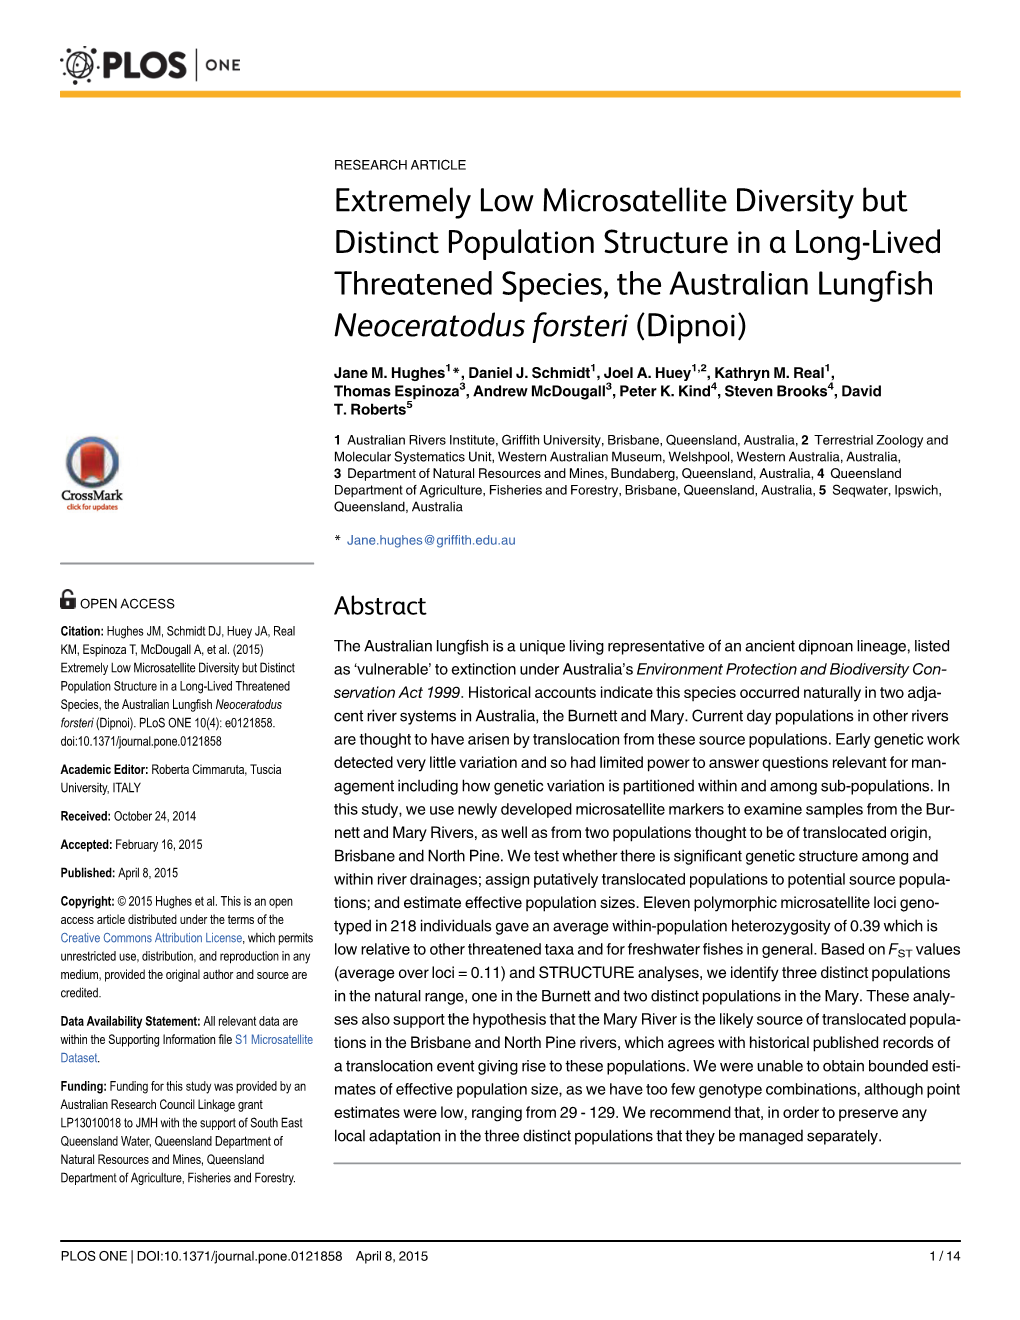 Extremely Low Microsatellite Diversity but Distinct Population Structure in a Long-Lived Threatened Species, the Australian Lungfish Neoceratodus Forsteri (Dipnoi)